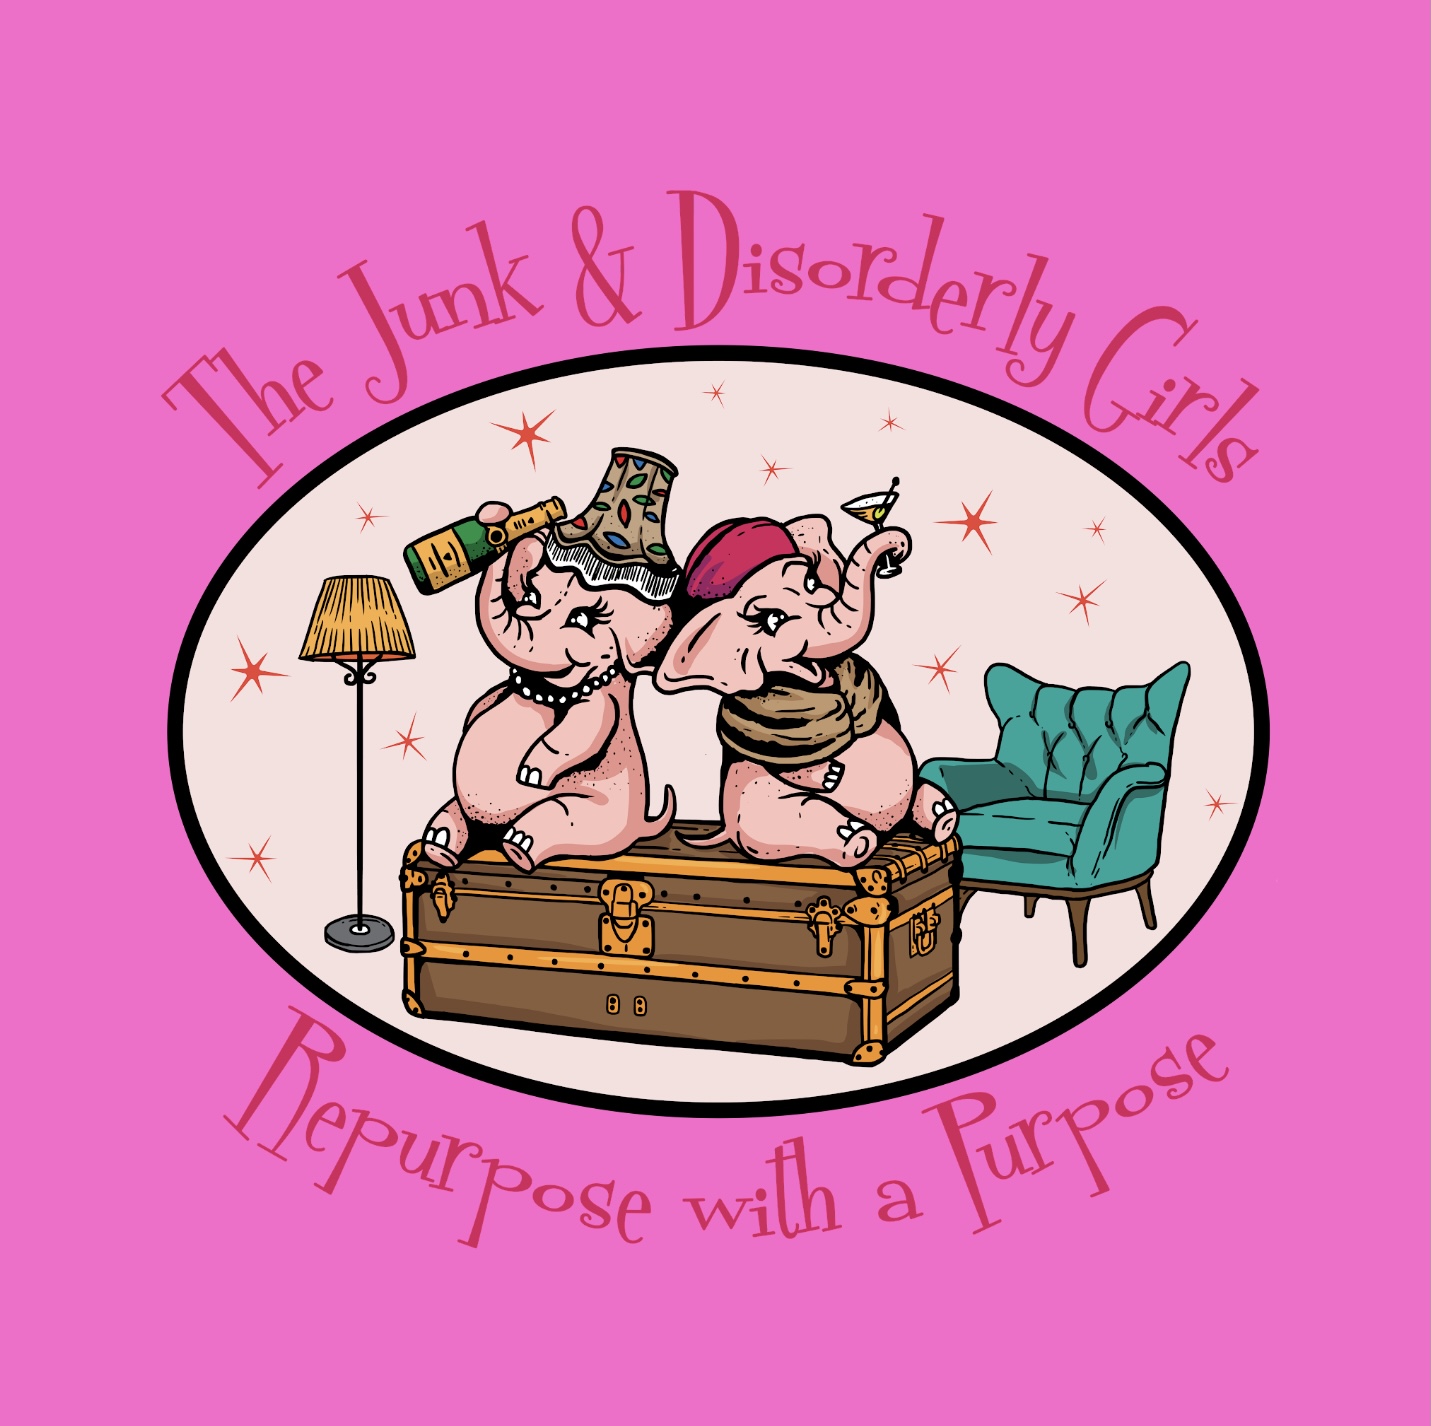 THE JUNK AND DISORDERLY GIRLS | Auction Ninja